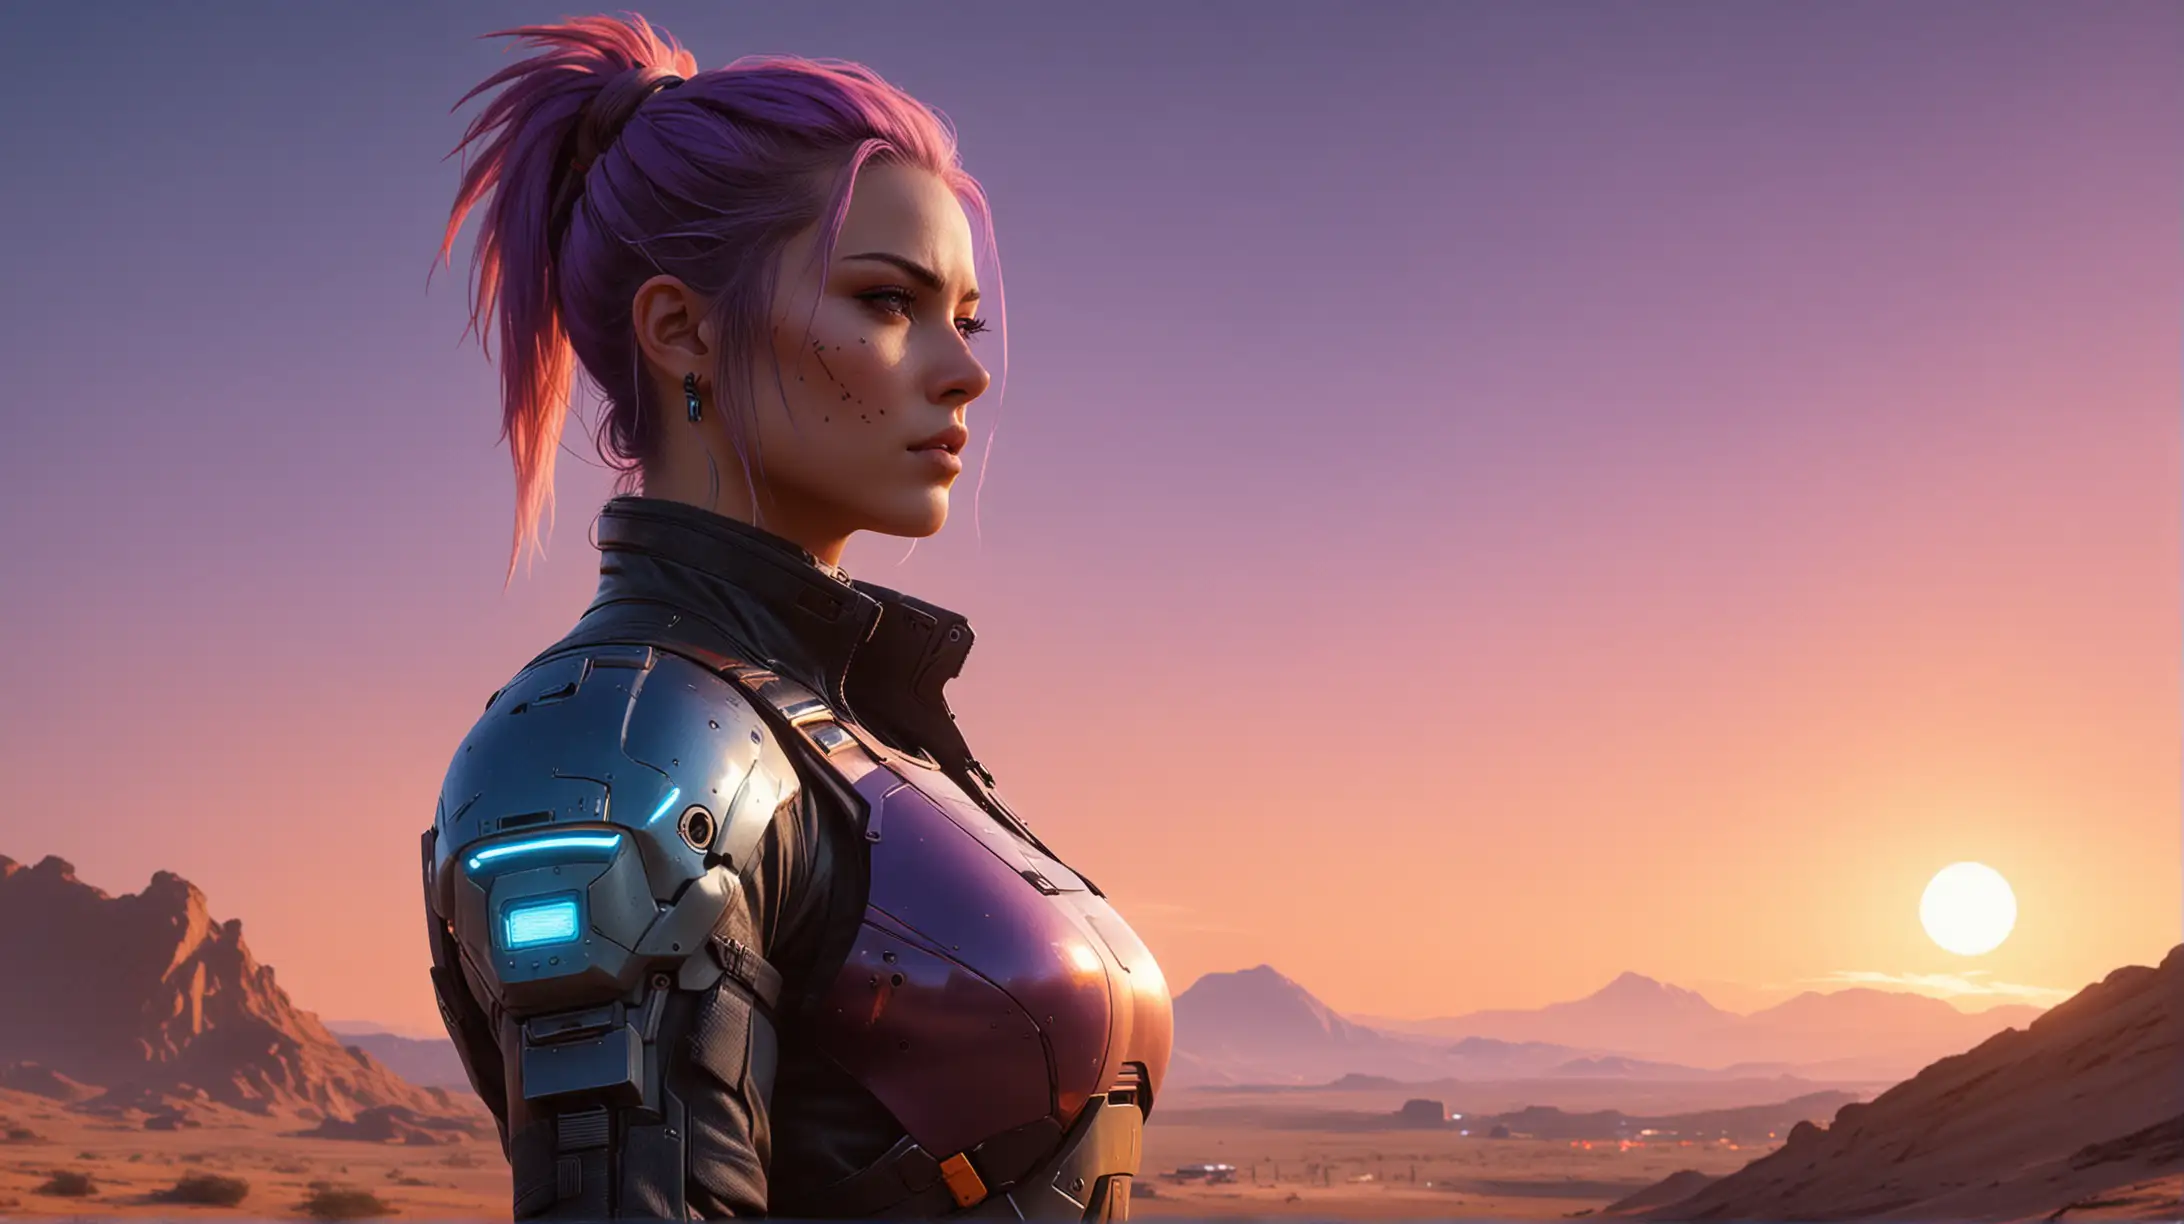 Create cover art inspired by Panam Palmer from Cyberpunk 2077. The artwork should depict a lone figure, resembling Panam, standing against a vast desert backdrop under a twilight sky. Emphasize her rugged and resilient appearance, reflecting her as a survivor and a warrior of the desert. The scene should capture the harsh beauty of the desert environment, using a palette of deep oranges, purples, and blues to convey both the toughness and the freedom represented by her character. The figure should be portrayed in a contemplative pose, looking off into the distance, with subtle hints of futuristic elements to tie back to her origins from Cyberpunk 2077.